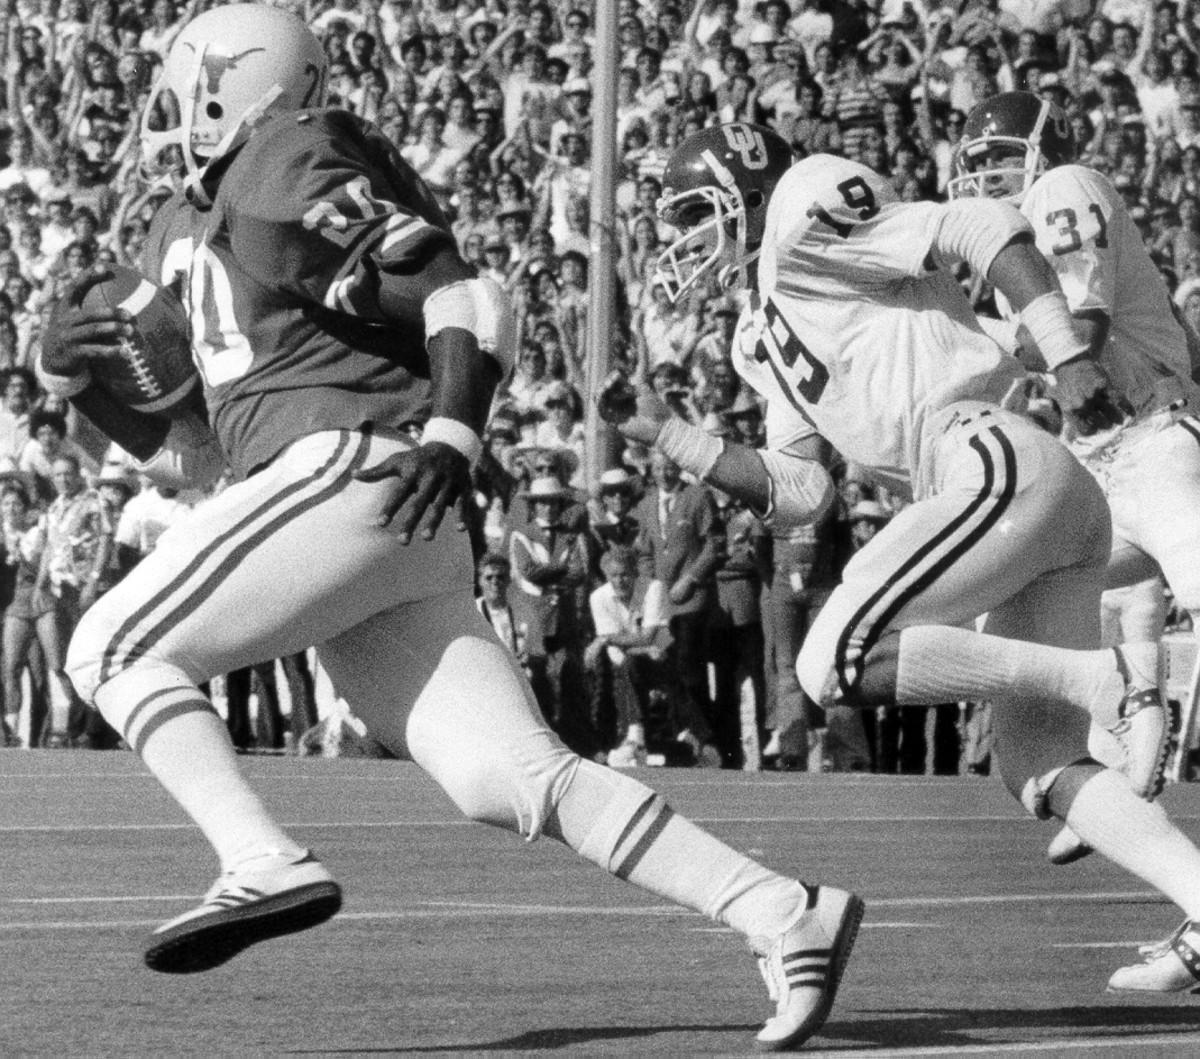 Oklahoma defensive back Zac Henderson (19) chases Texas running back Earl Campbell. (PHOTO: OU Athletics)